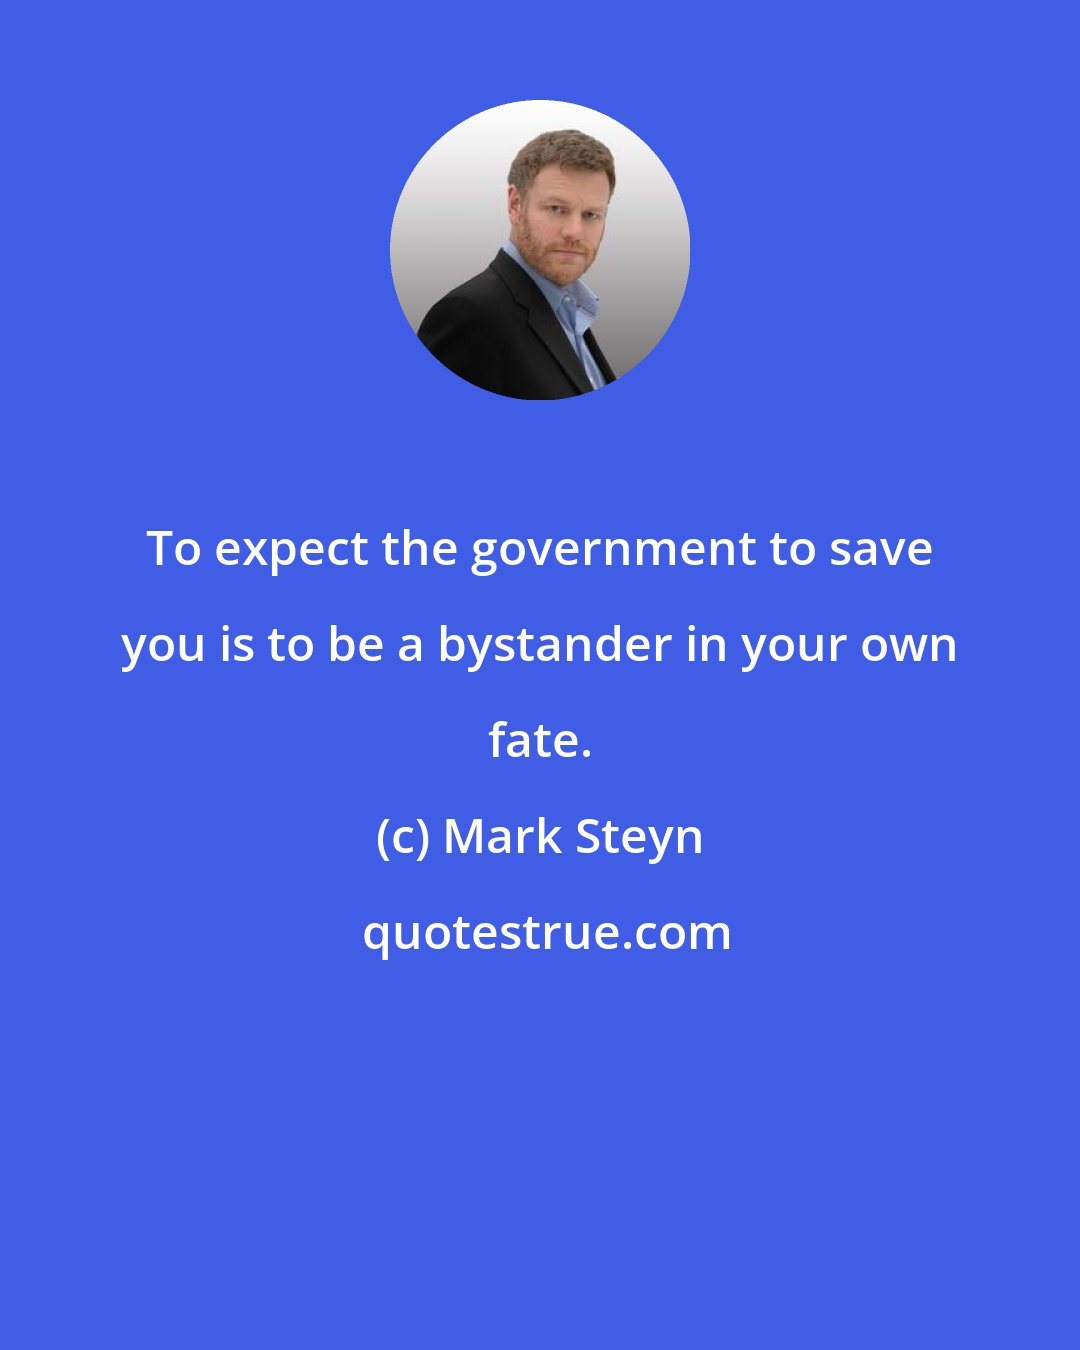 Mark Steyn: To expect the government to save you is to be a bystander in your own fate.